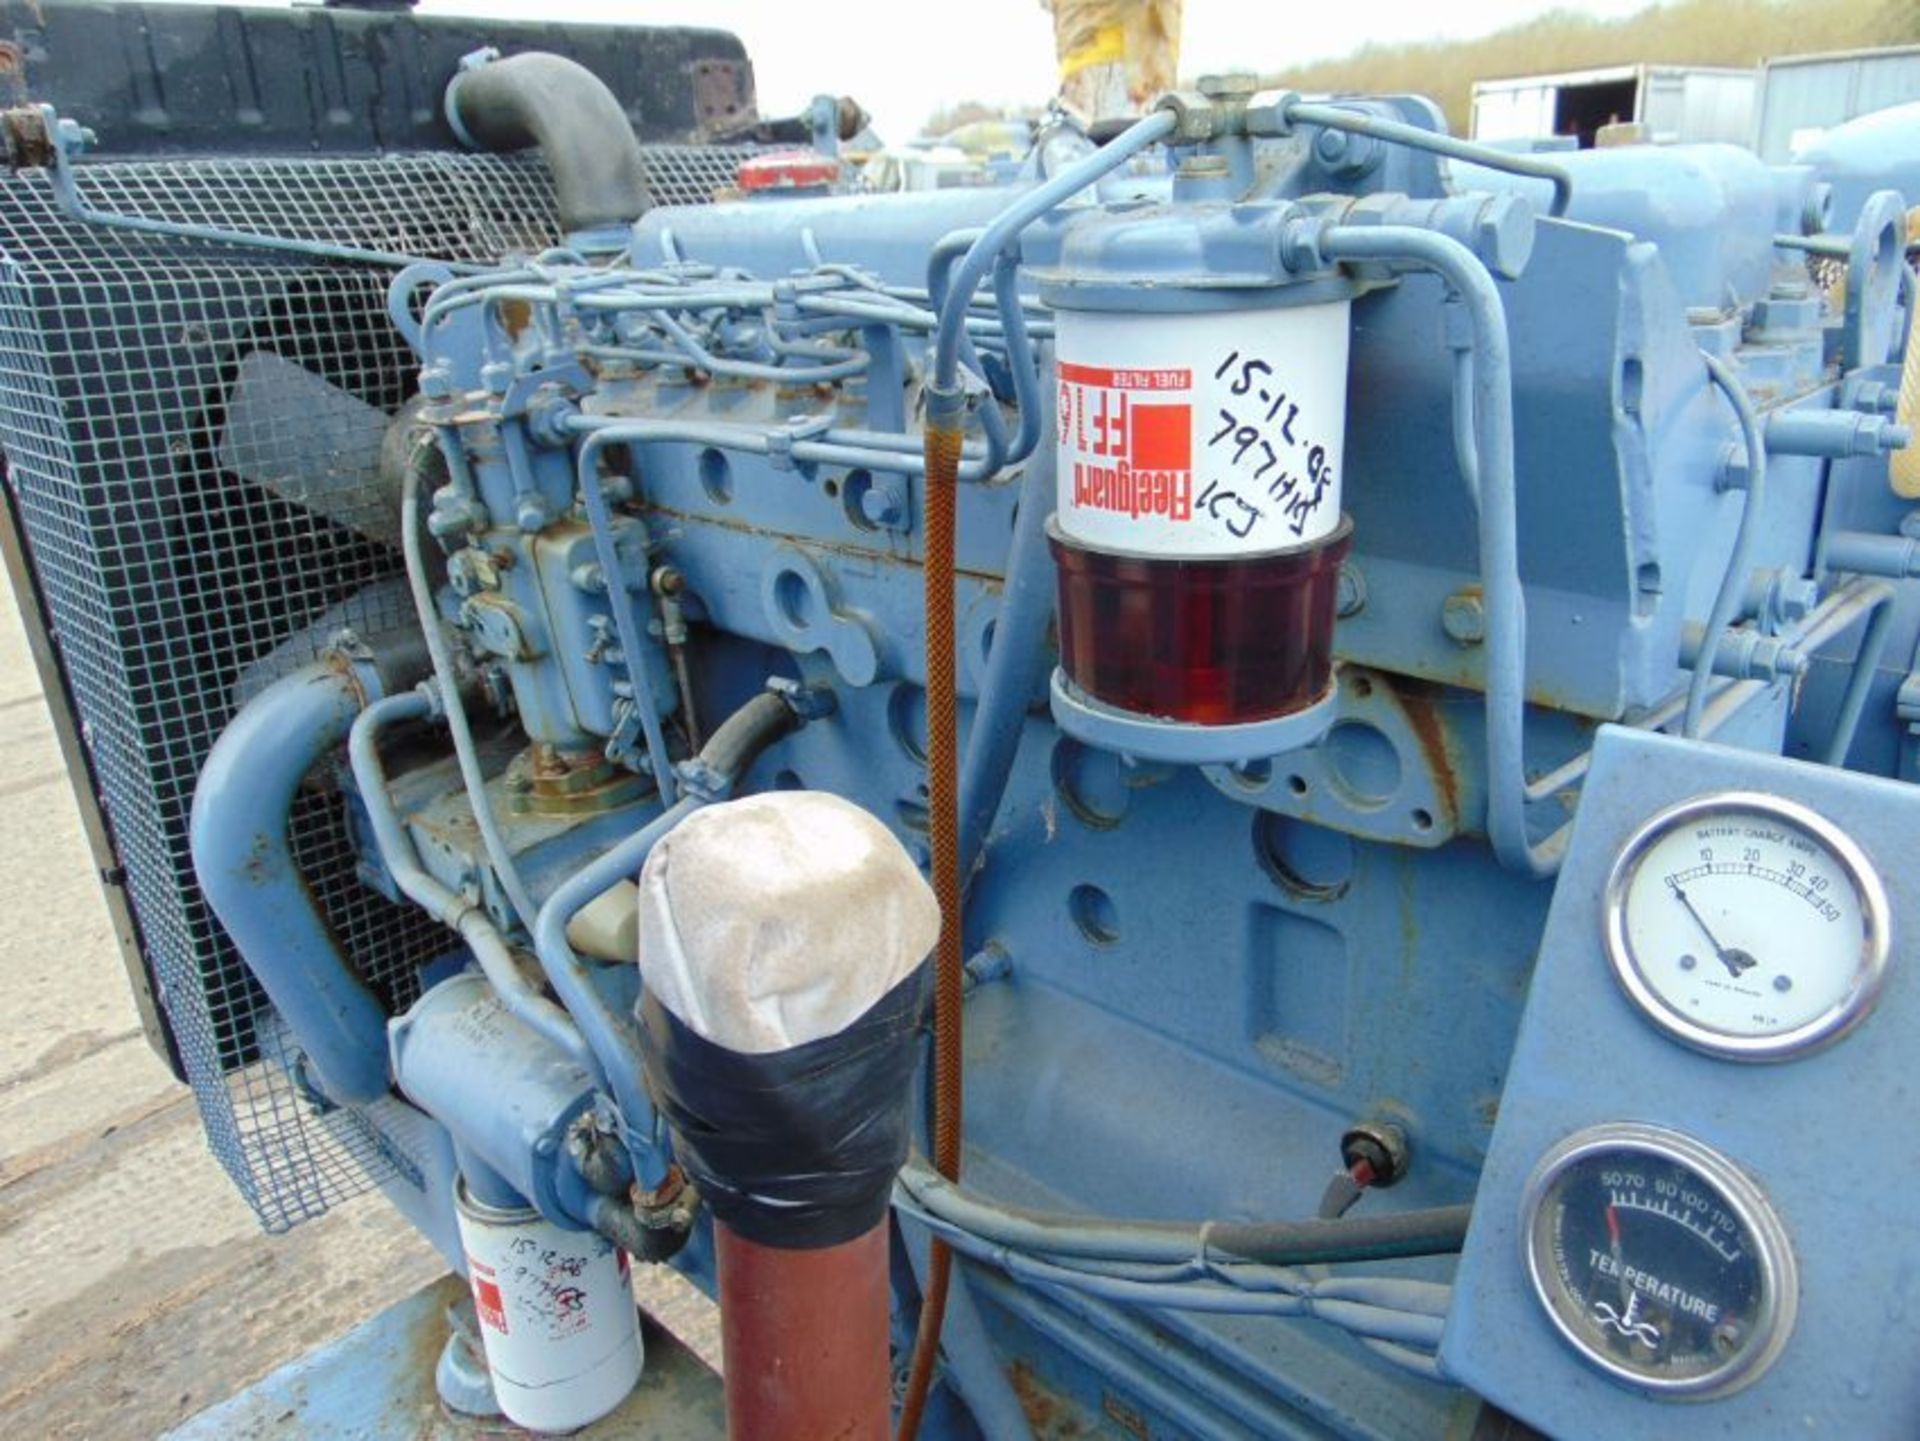 Auto Diesel 85 KVA 68 Kw 3 Phase 415/240V Standby Mains Faliure Perkins Diesel Generator 807 HOURS! - Image 10 of 20